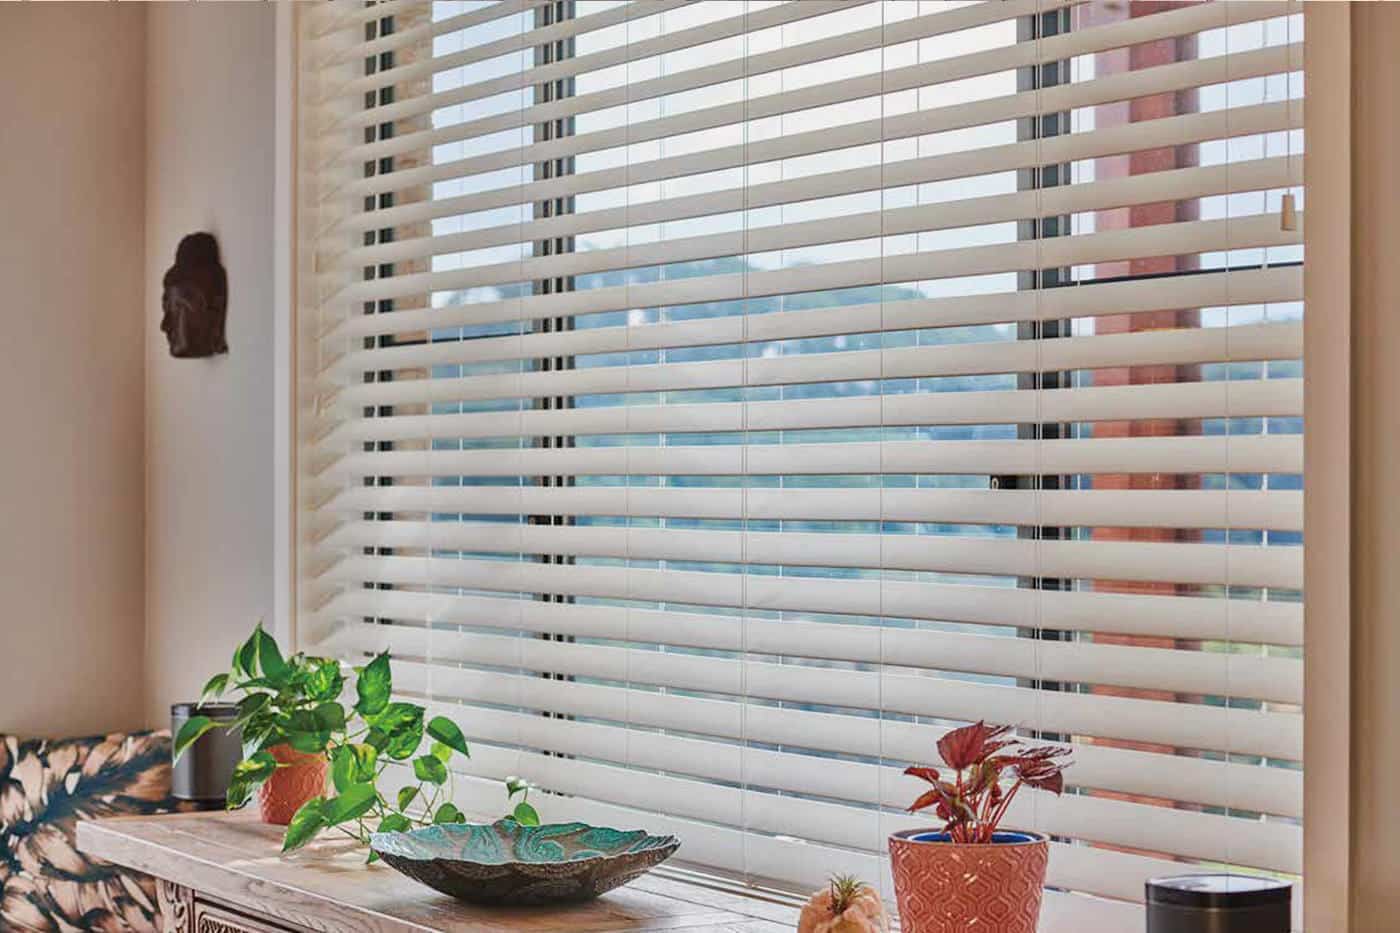 Norman Timber Venetians handcrafted using Phoenixwood, lightweight and durable, with seamless arrangement allowing for greater light and privacy control. Made in Australia. On display in our Sydney showroom.